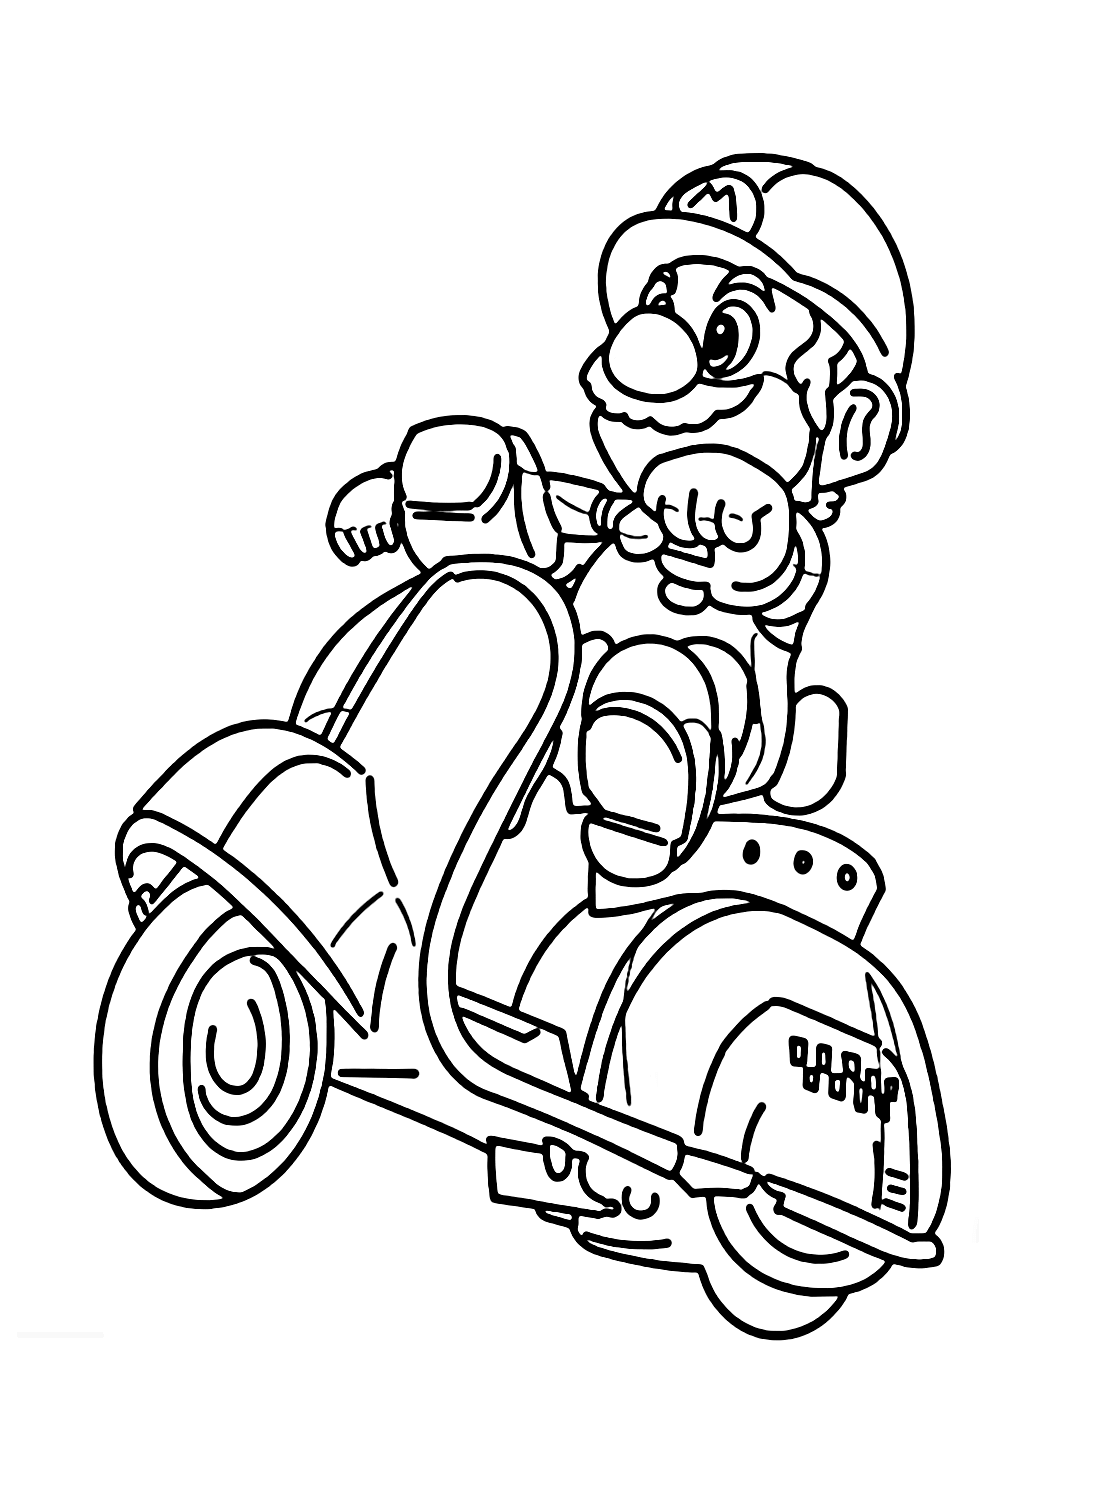 Mario on a Motorbike Coloring Page